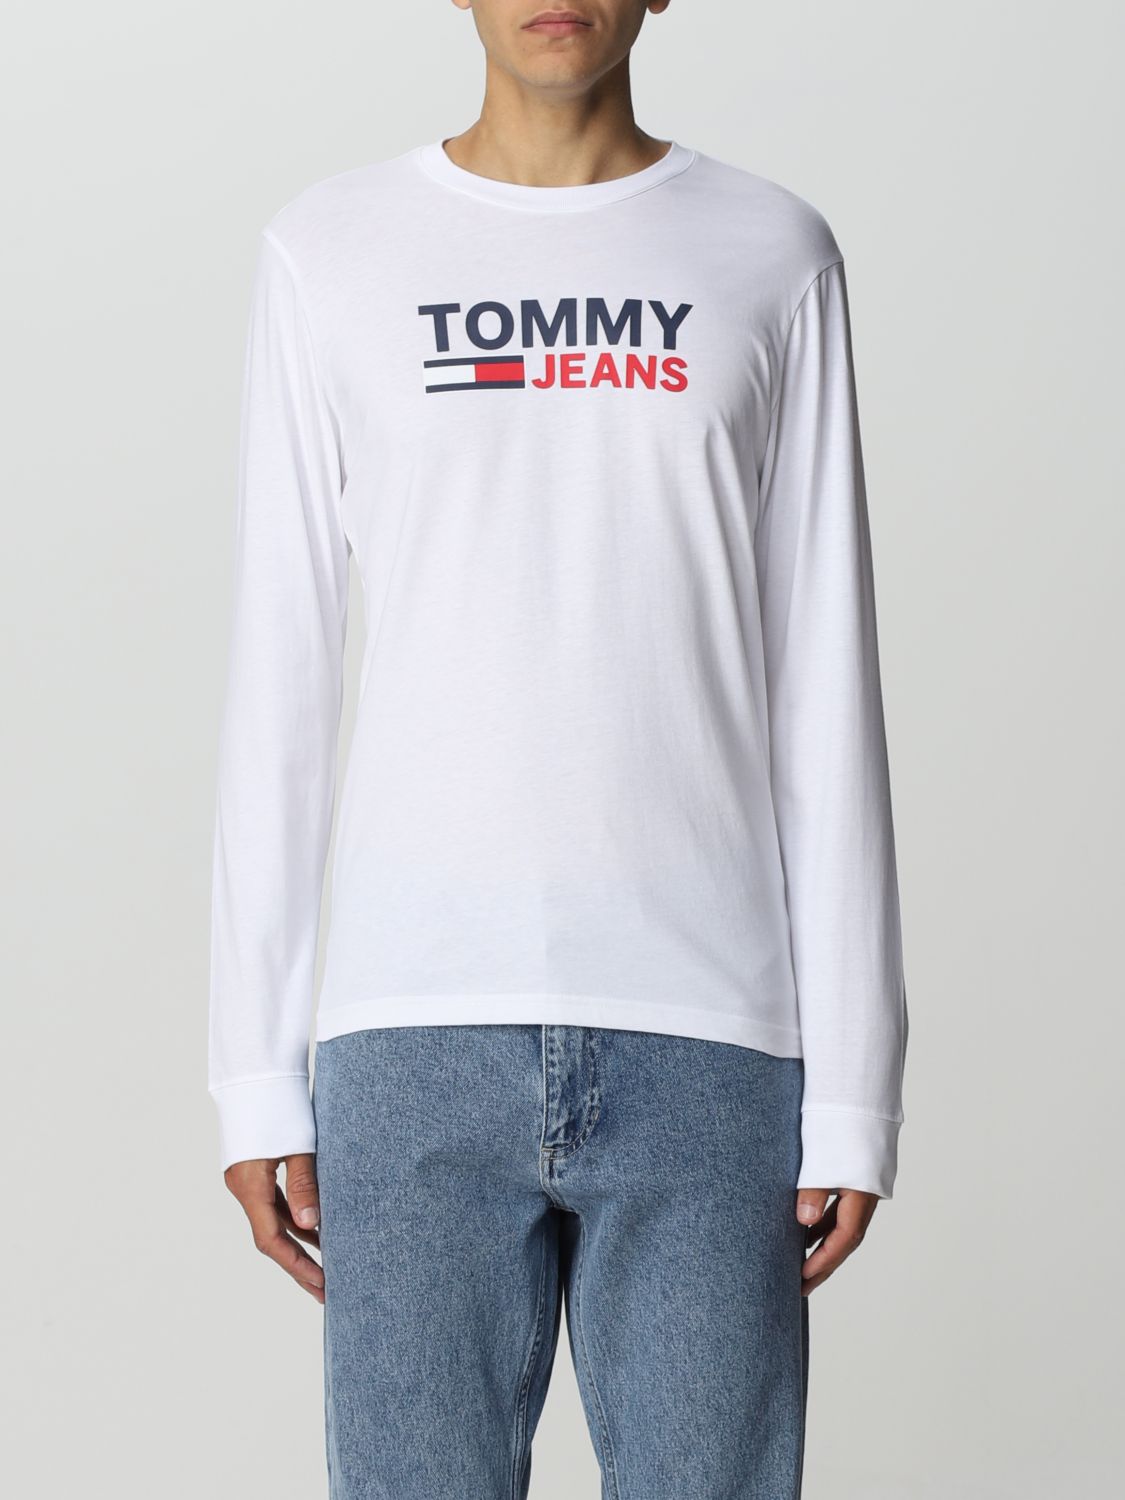 TOMMY JEANS: t-shirt for man - White | Tommy Jeans t-shirt DM0DM09487 ...